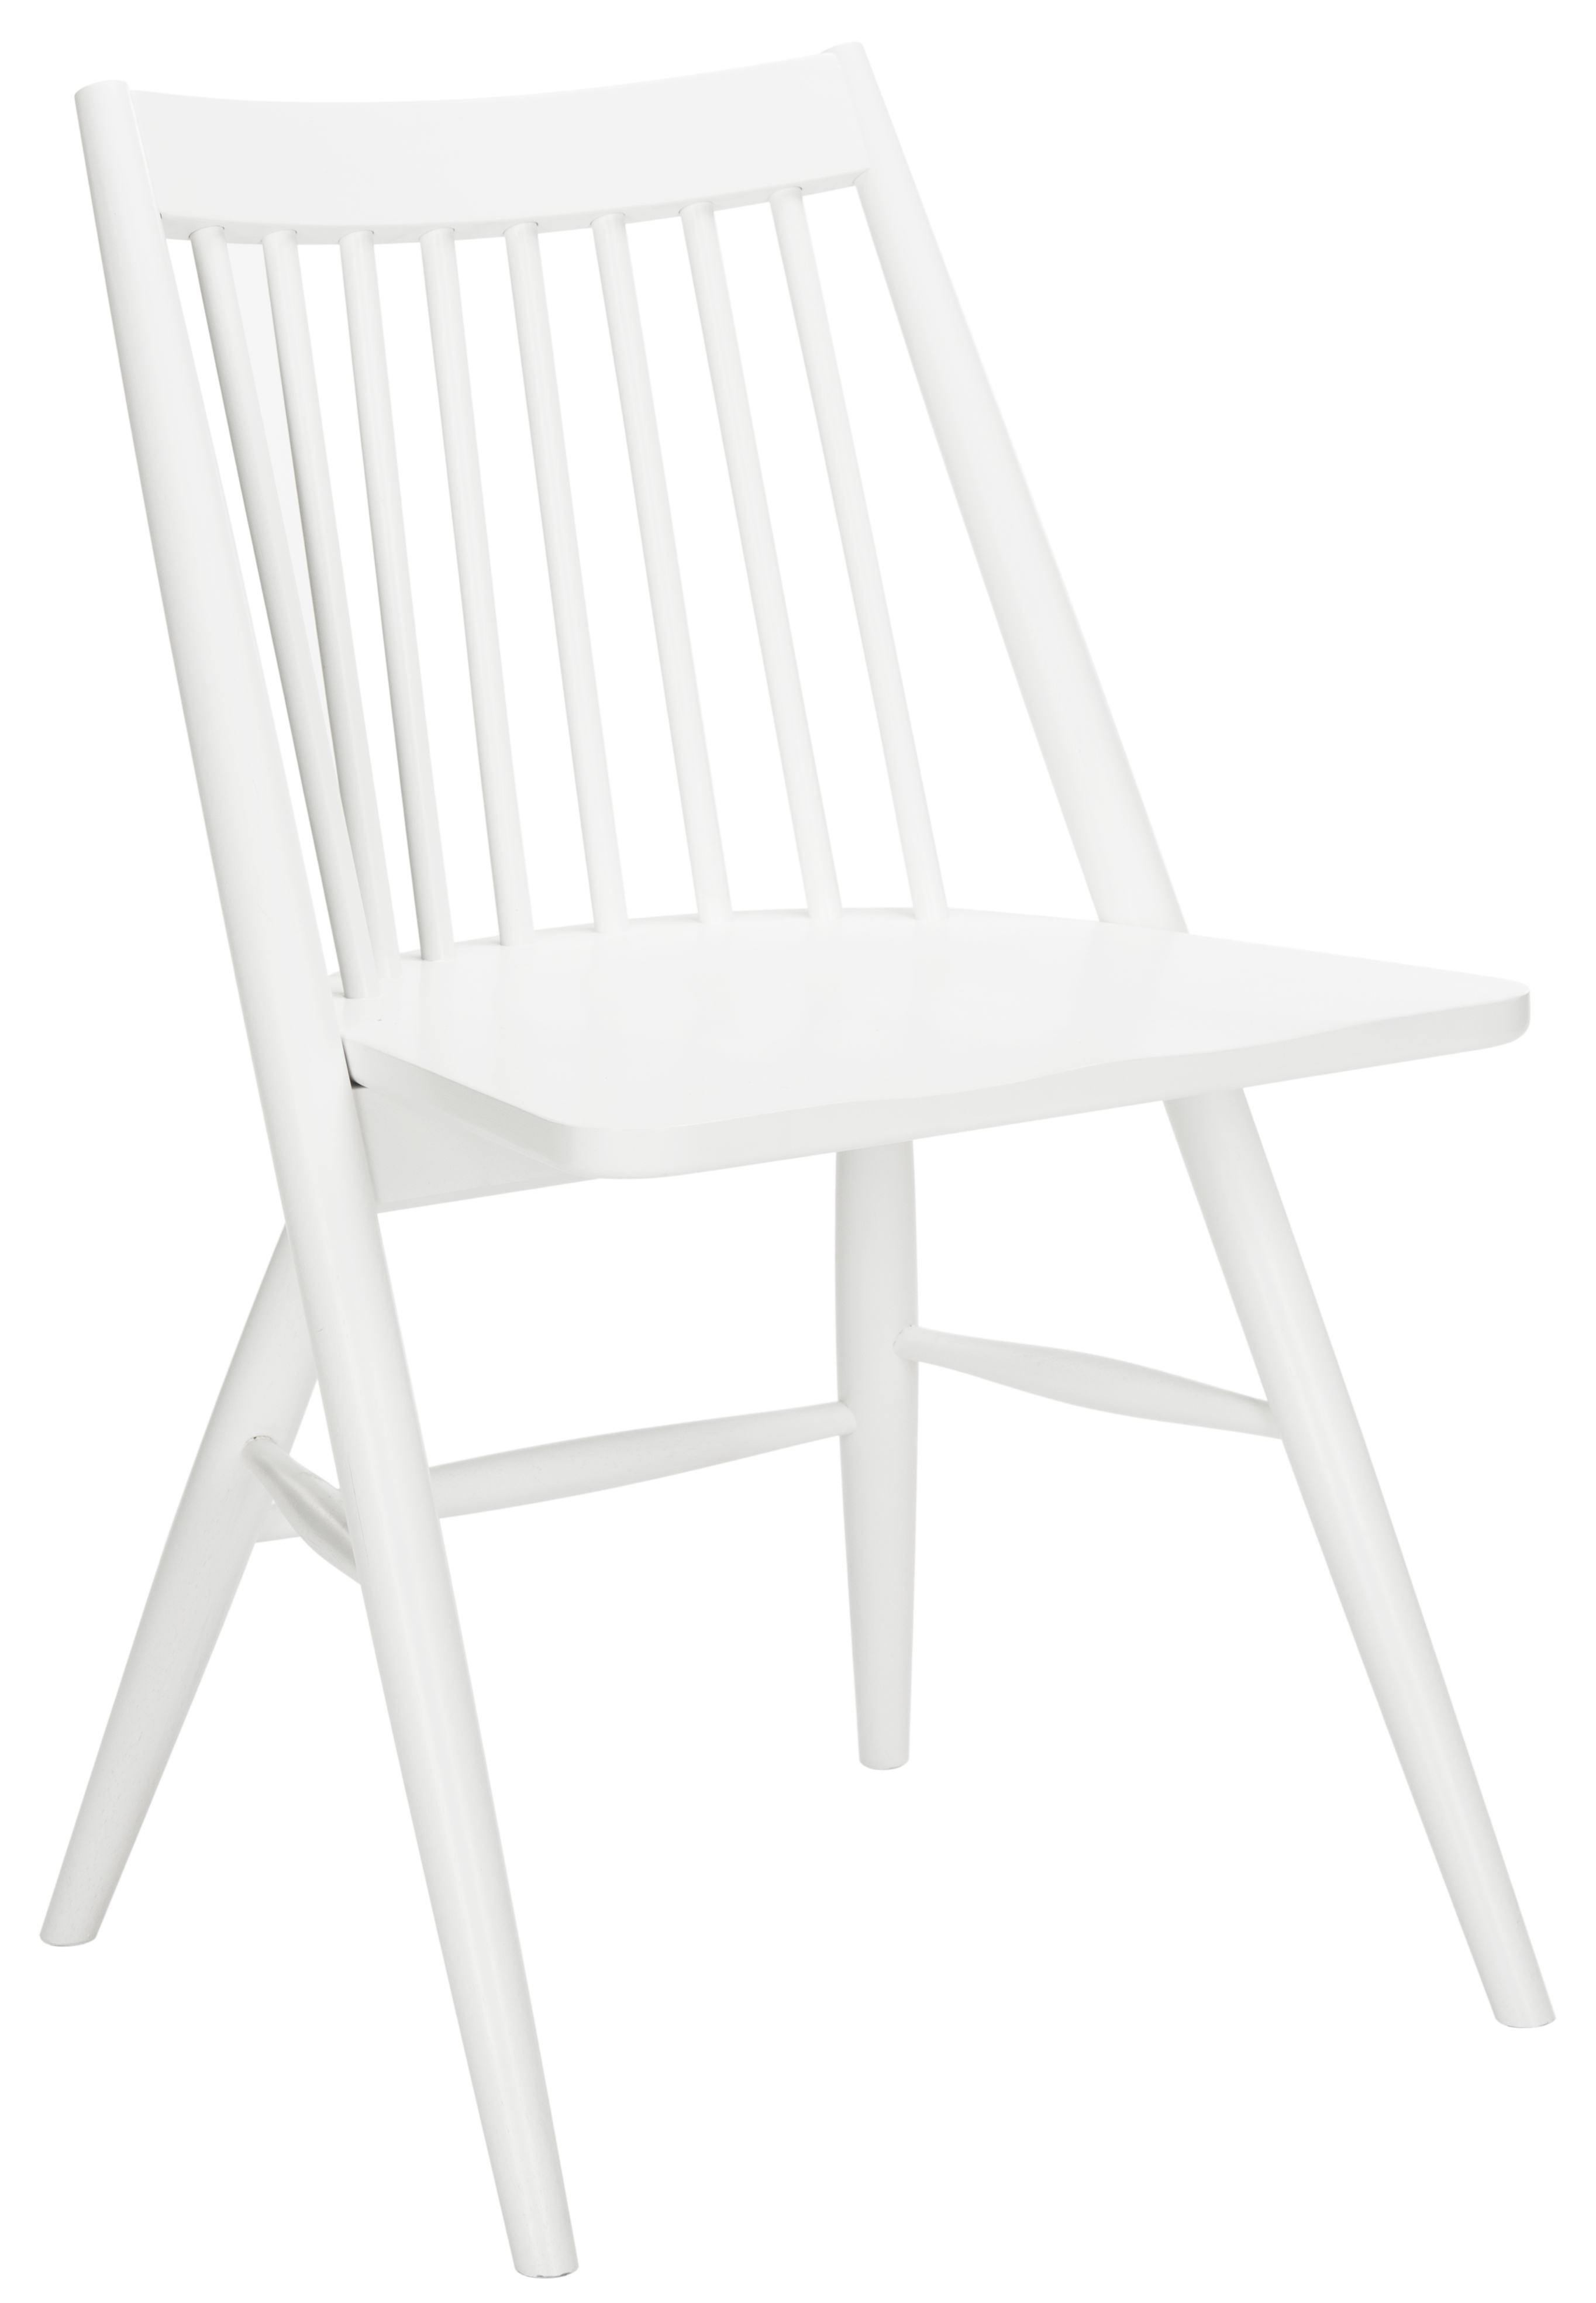 Ames Chairs, White, Set of 2 - Image 3